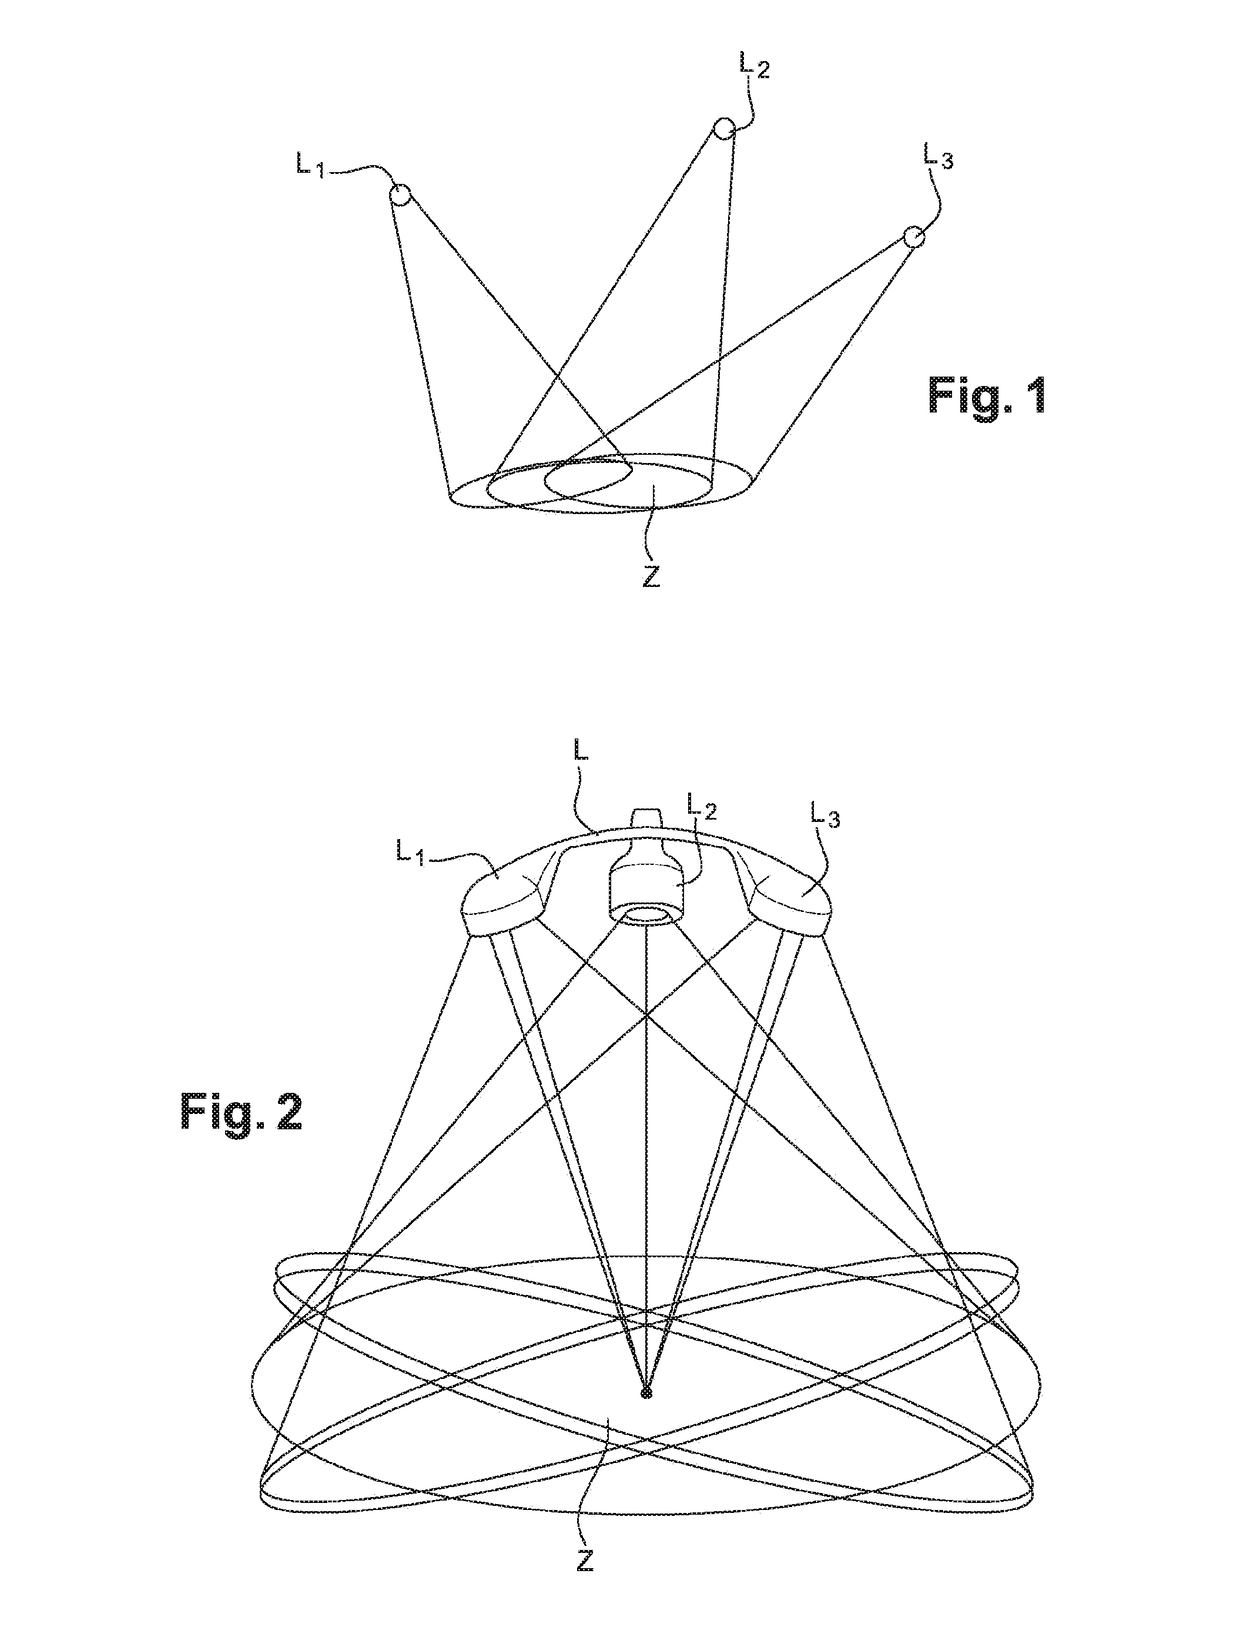 Configuration of the intensity of the light sources composing a lighting system